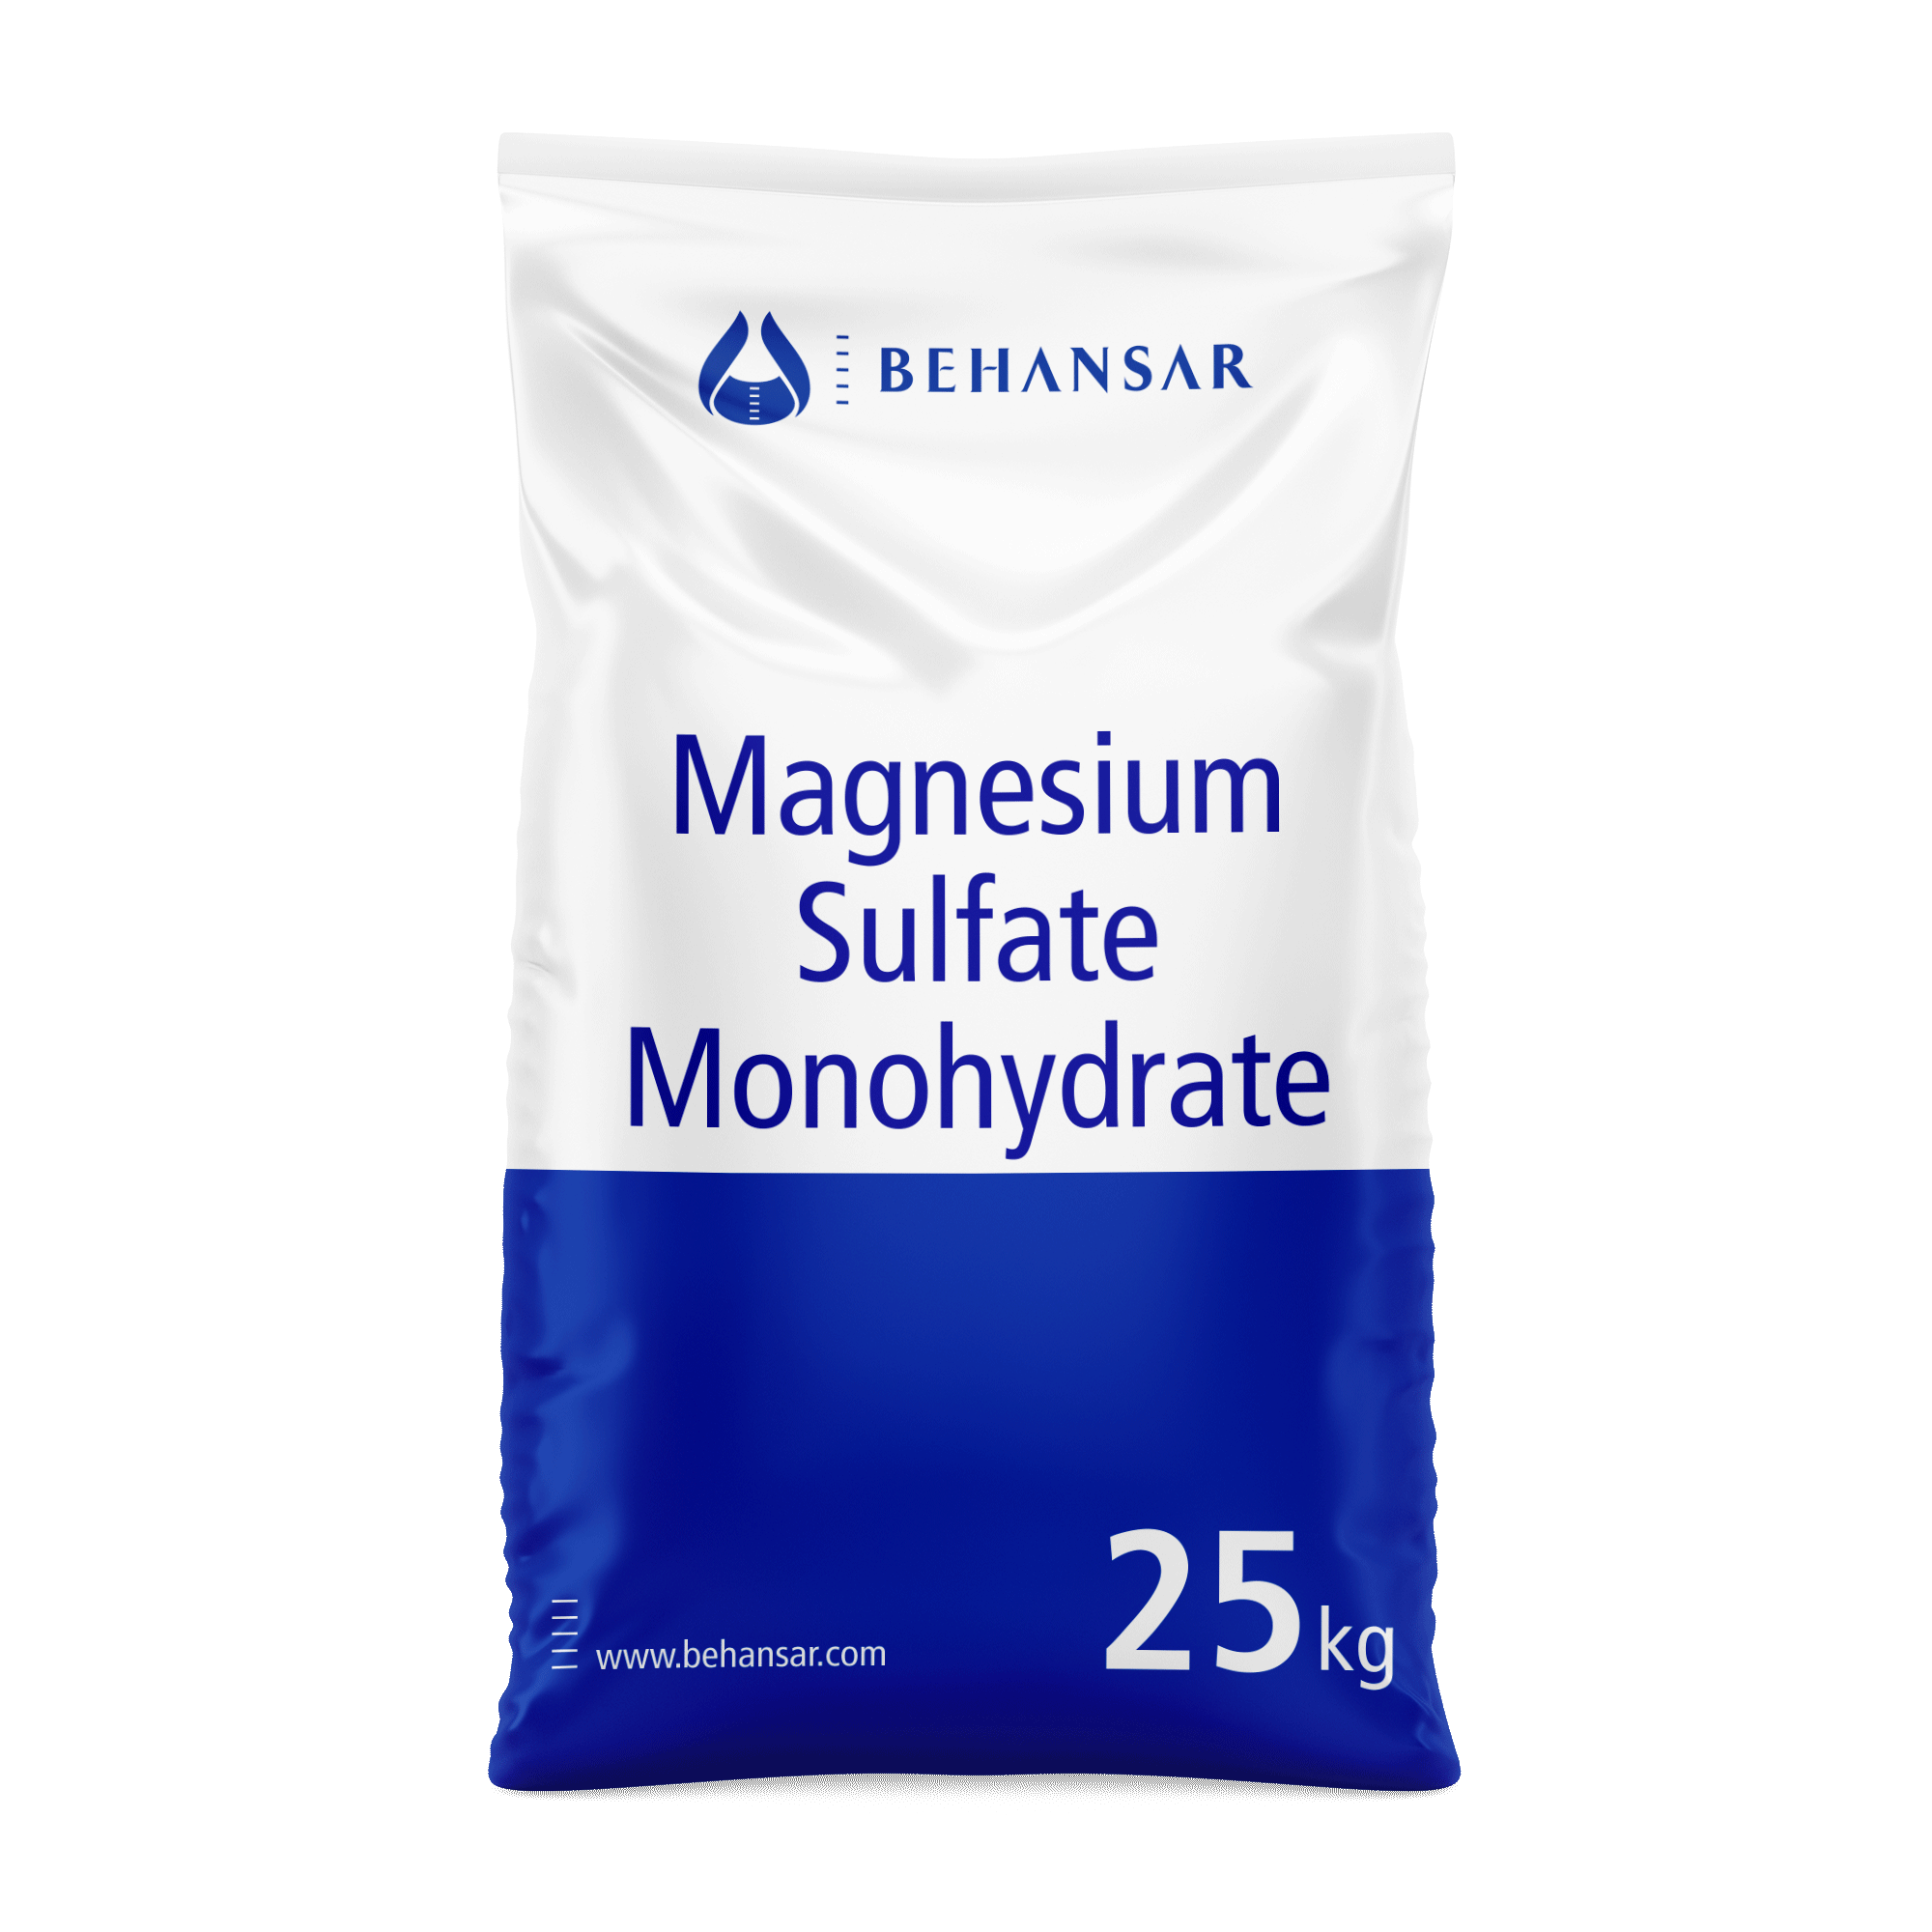 Magnesium Sulfate Monohydrate is one of the products of Behansar Co